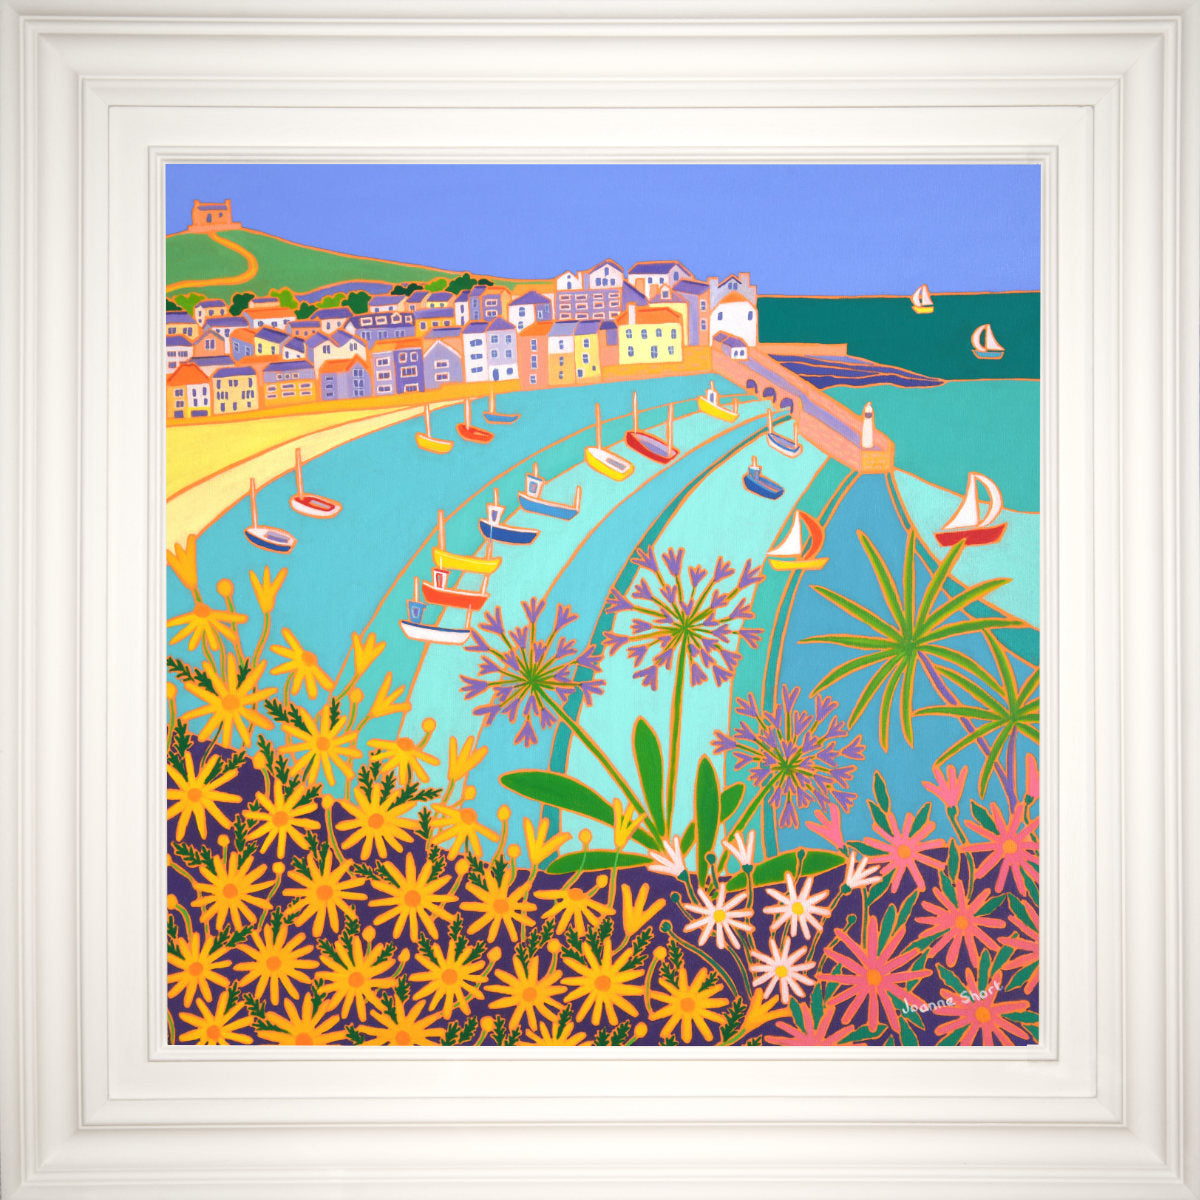 &#39;Sunny Seaside flowers, St Ives’. 24x24 inches oil on canvas. Garden Painting of Cornwall by Cornish Artist Joanne Short from our Cornwall Art Gallery